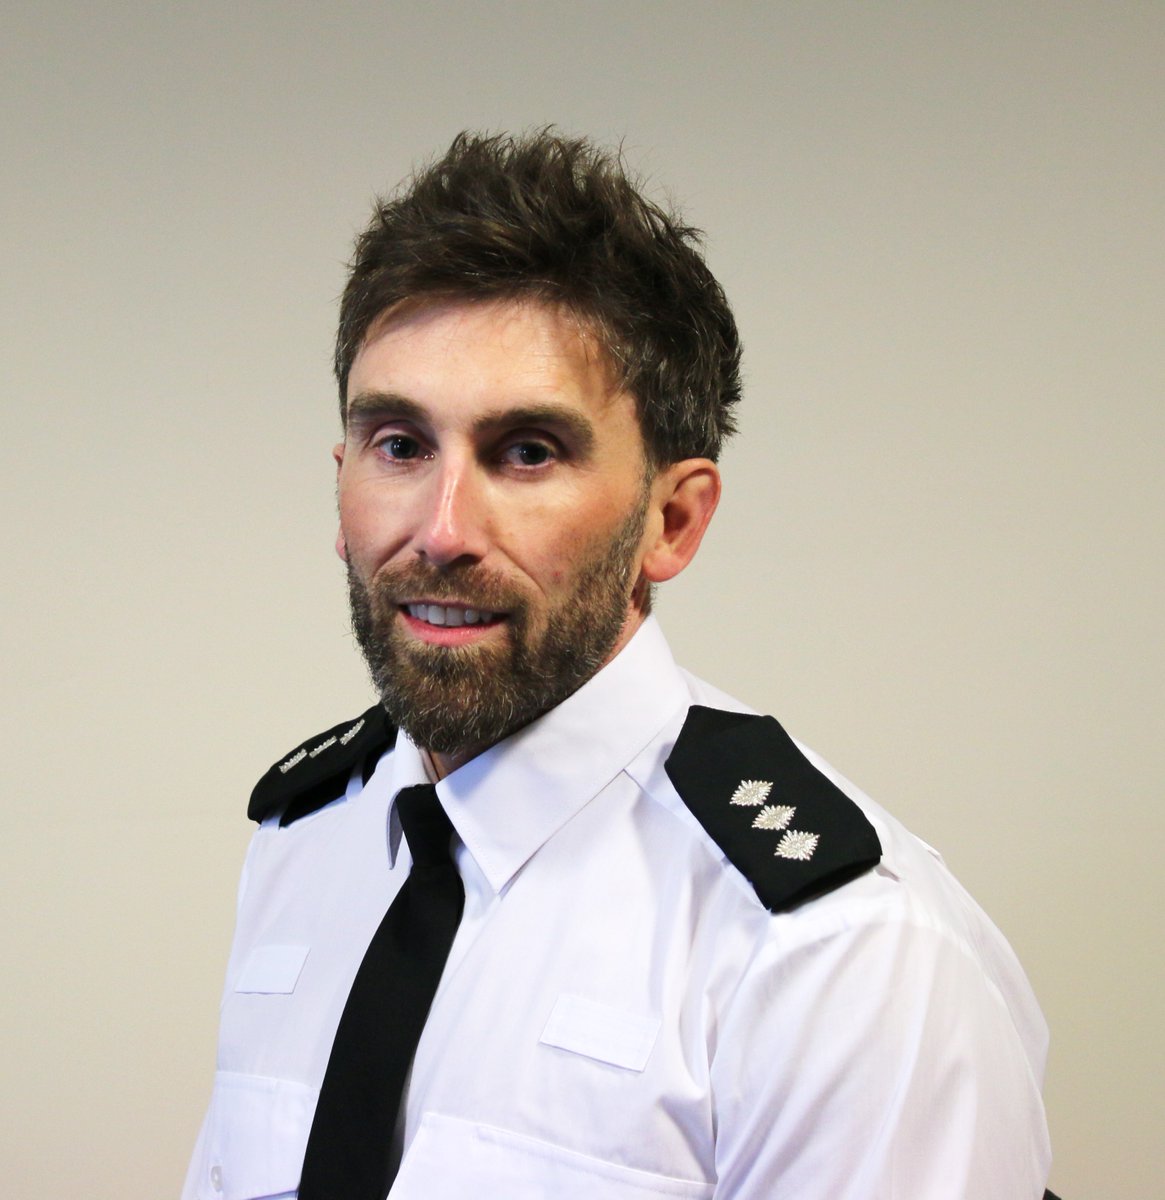 MEET THE COMMANDER (NEWSTEAD) - Come and meet Chief Inspector Dave Barrow on Tuesday 16th April 4pm to 6pm at The Laudau Centre, Waterside Drive, Newstead, ST3 3NW